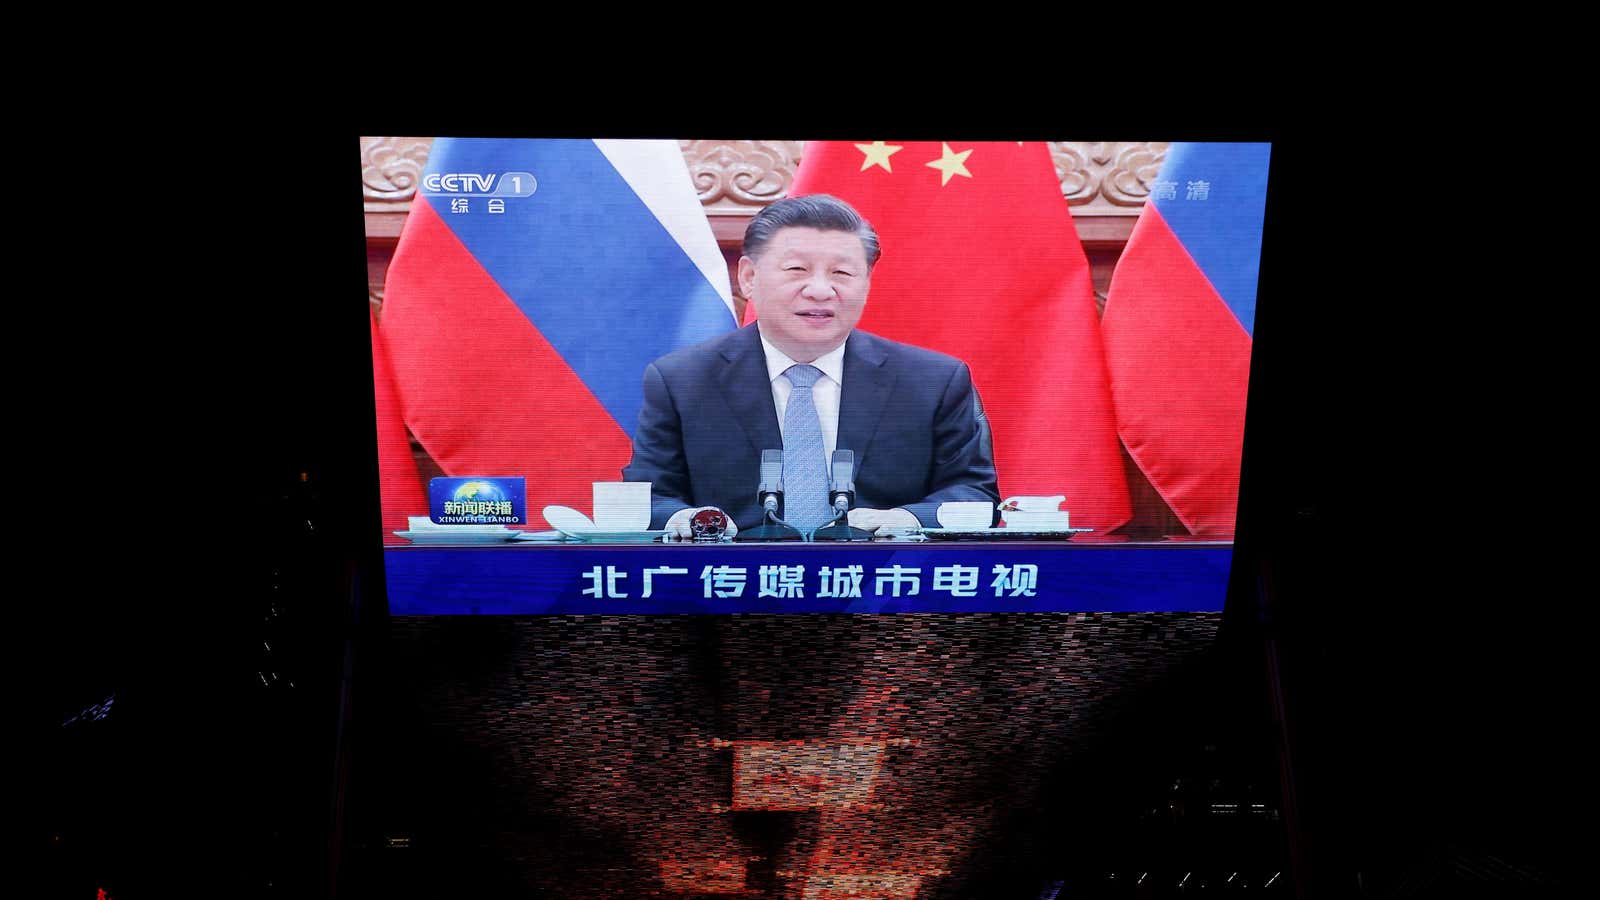 Chinese President Xi Jinping is seen on a giant screen, broadcasting news footage of a virtual meeting between him and Russian President Vladimir Putin, atâ€¦